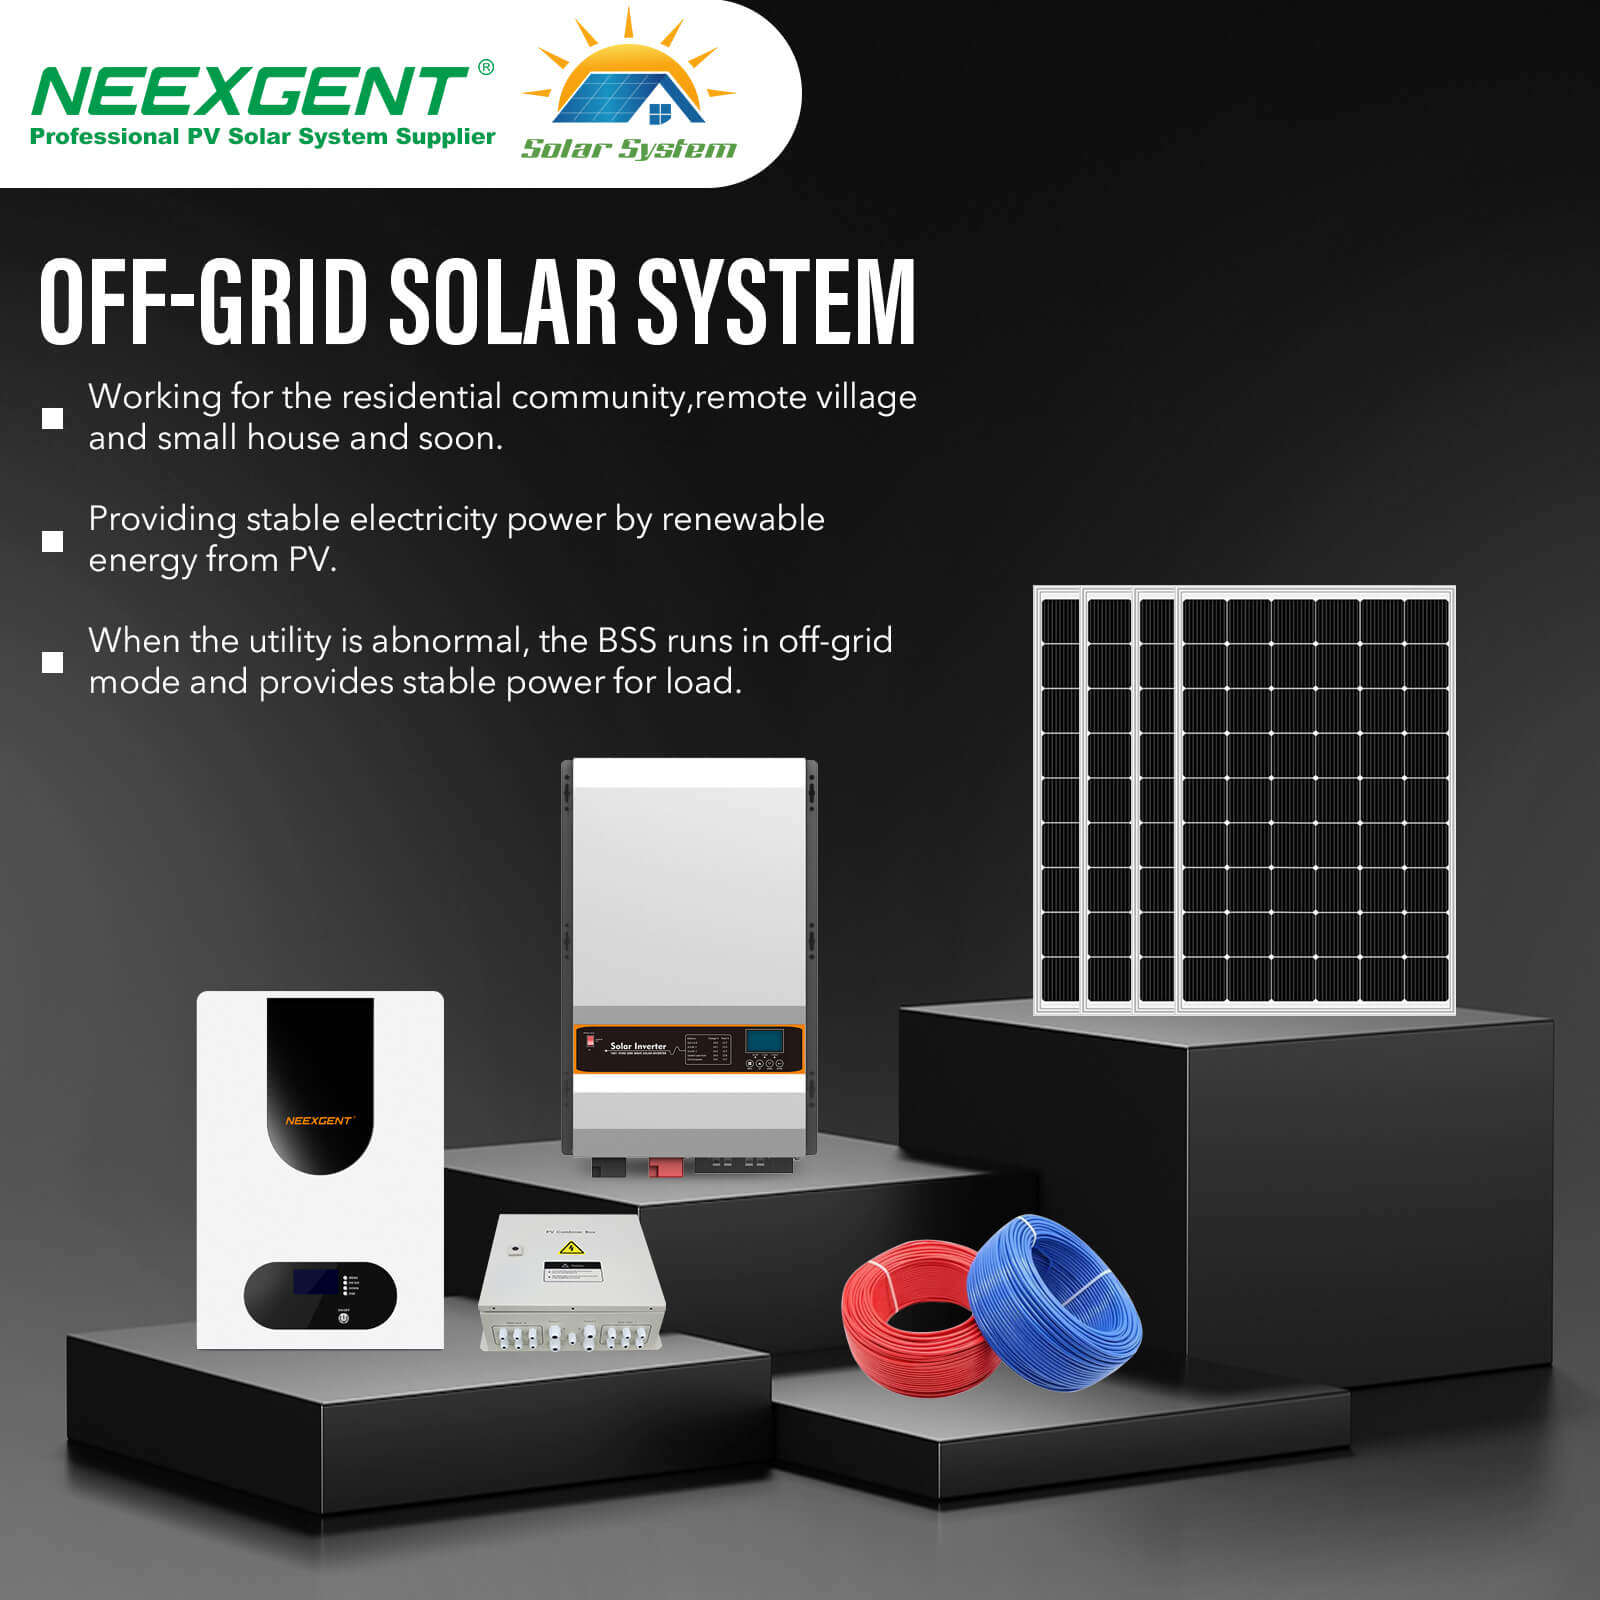 Off-grid solar system with battery backup